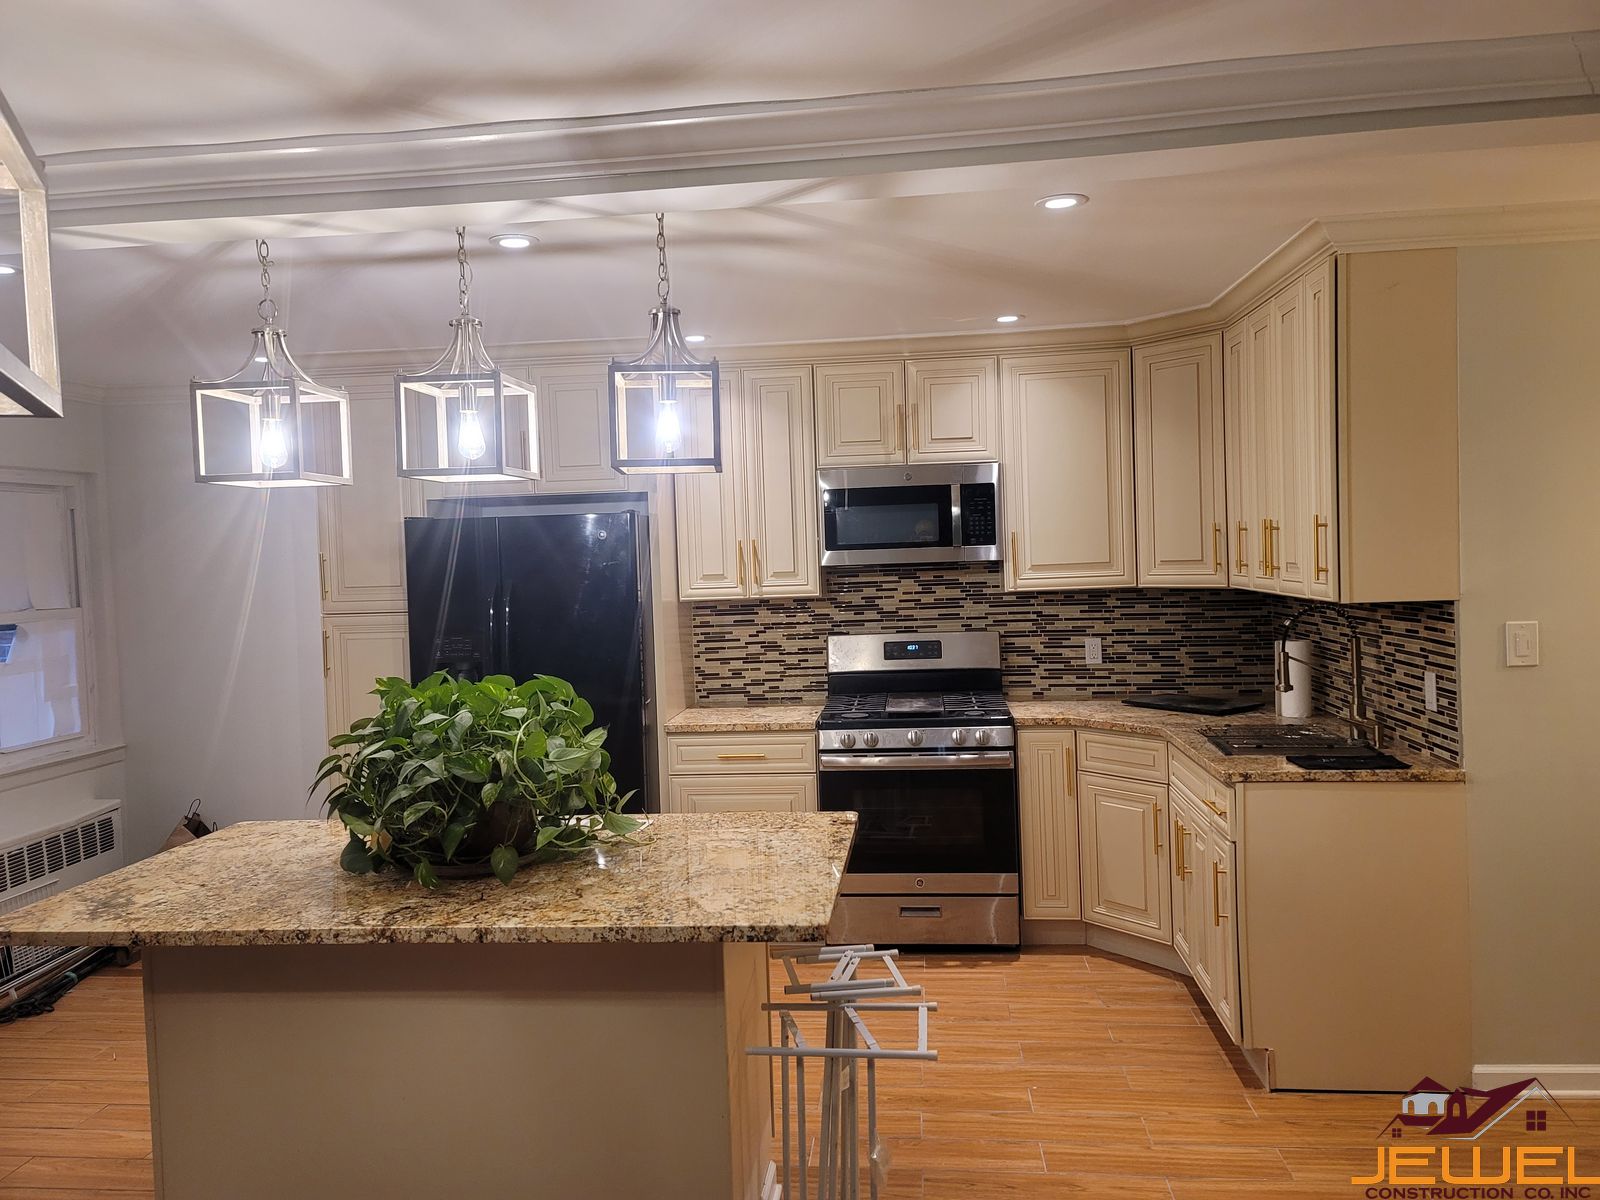 kitchen-remodeling-brooklyn